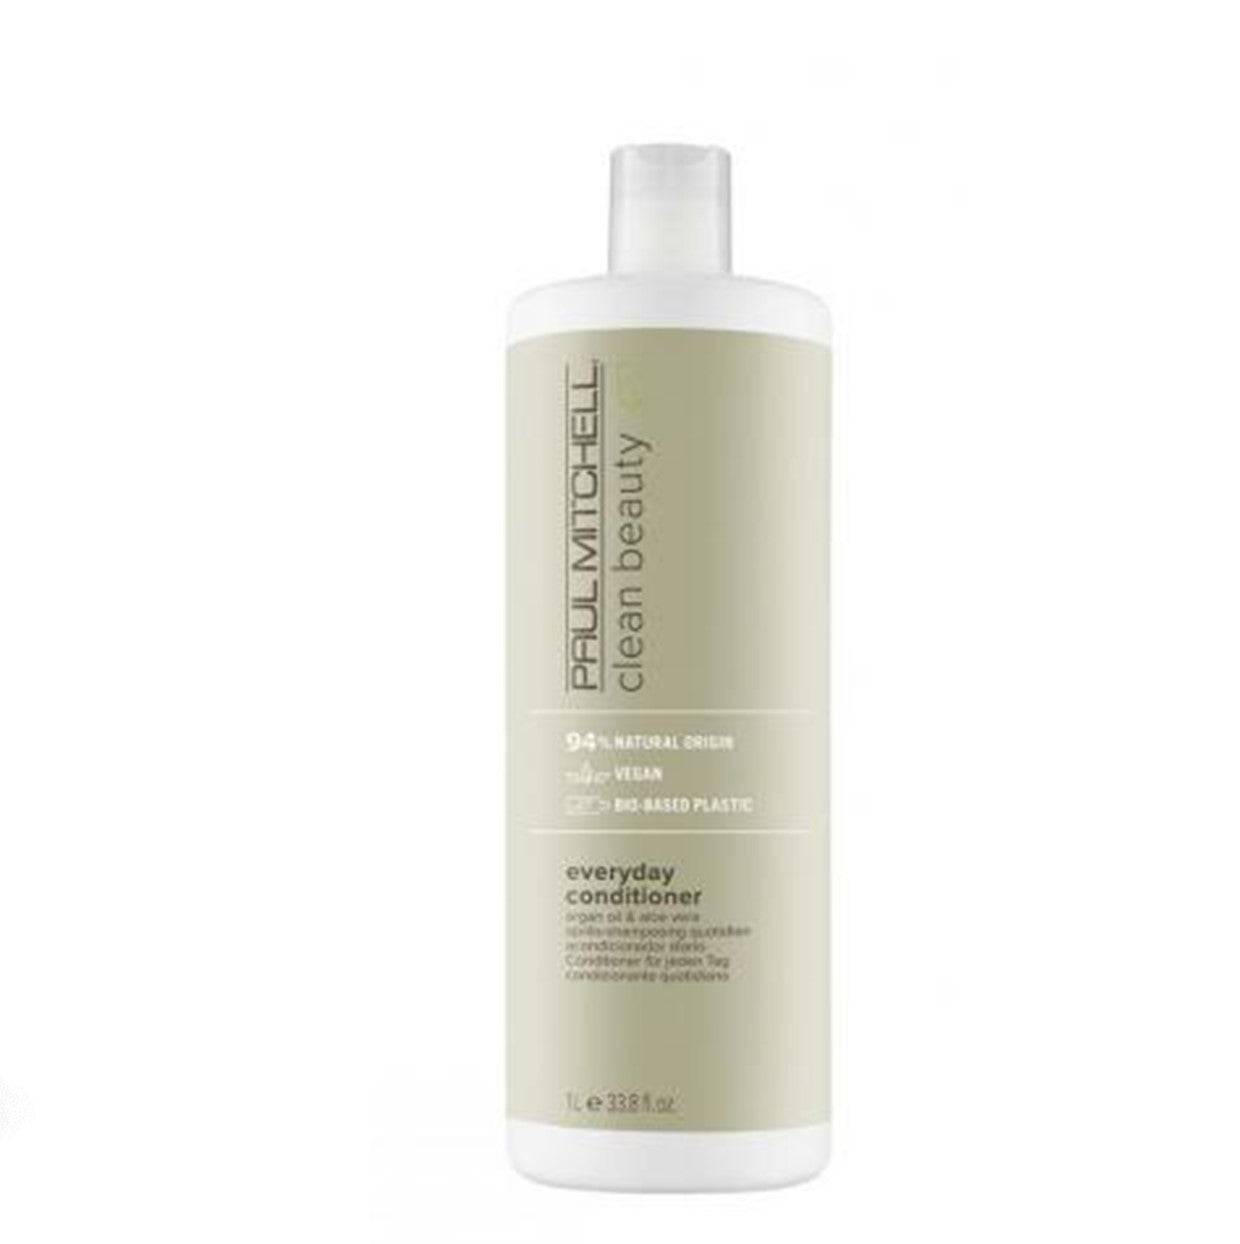 Paul Mitchell Clean Beauty Everyday Conditioner 1000ml - On Line Hair Depot